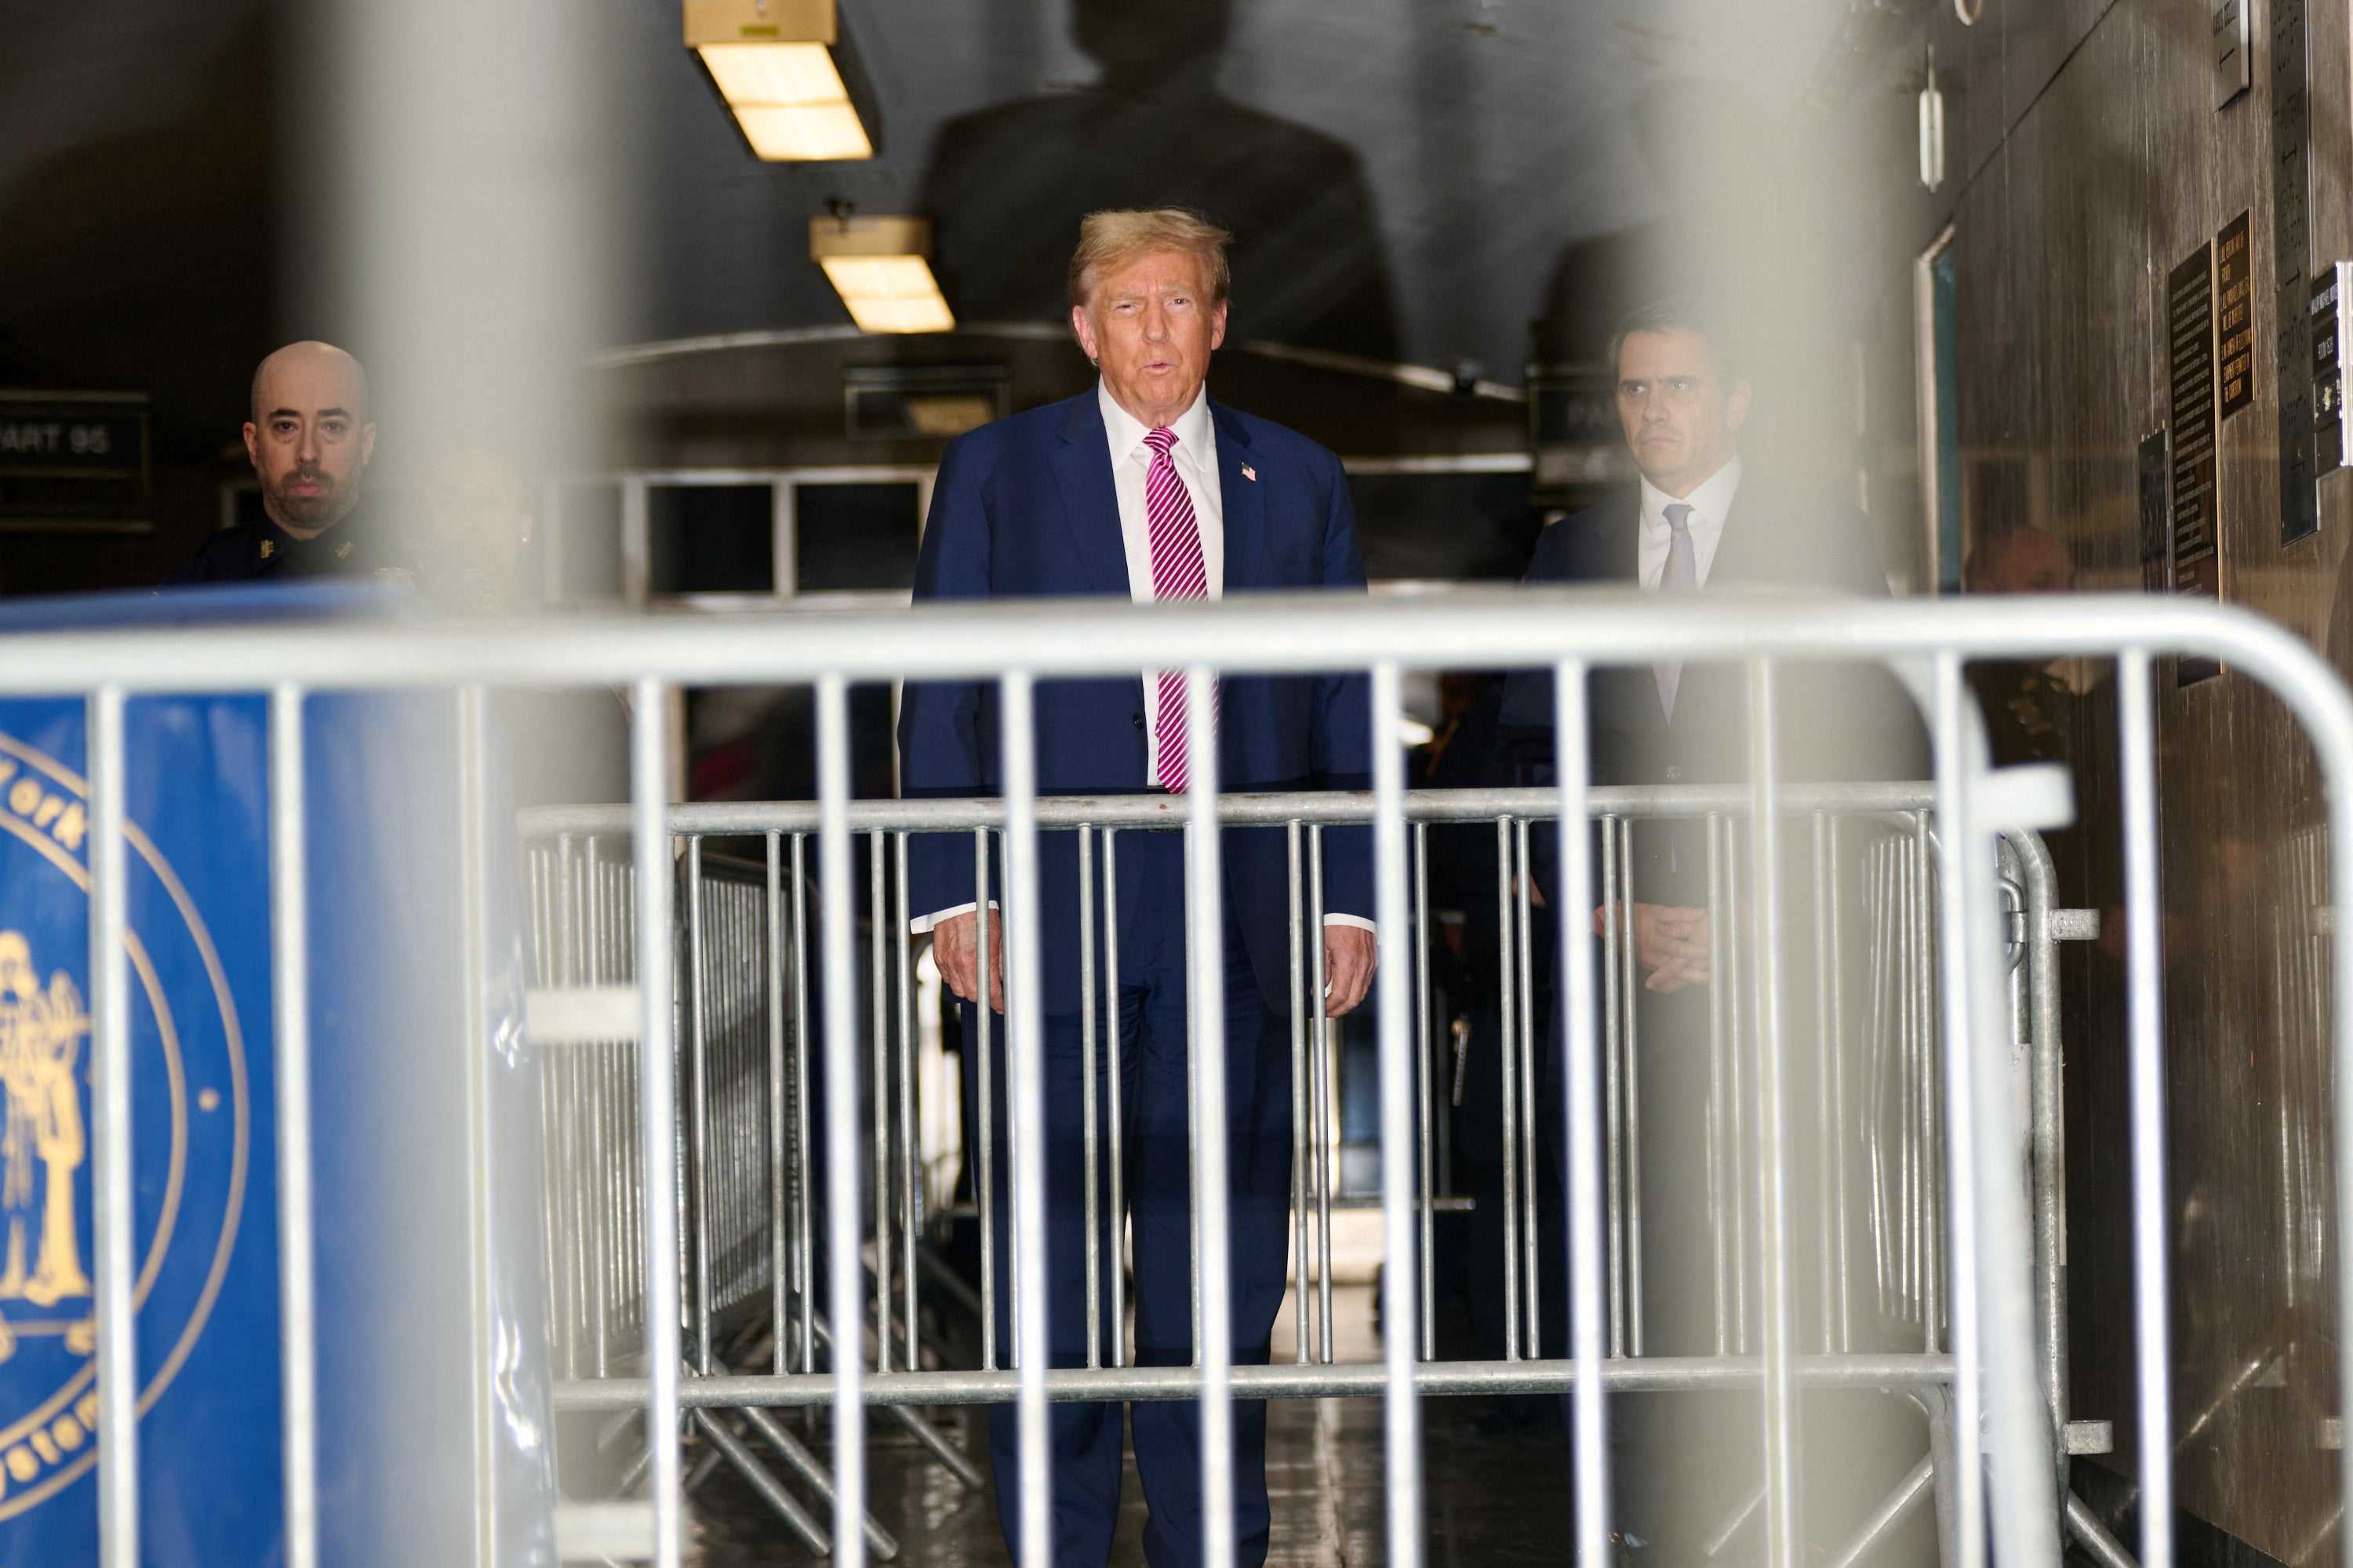 Donald Trump speaks to reporters inside a Manhattan criminal courthouse on 19 April.